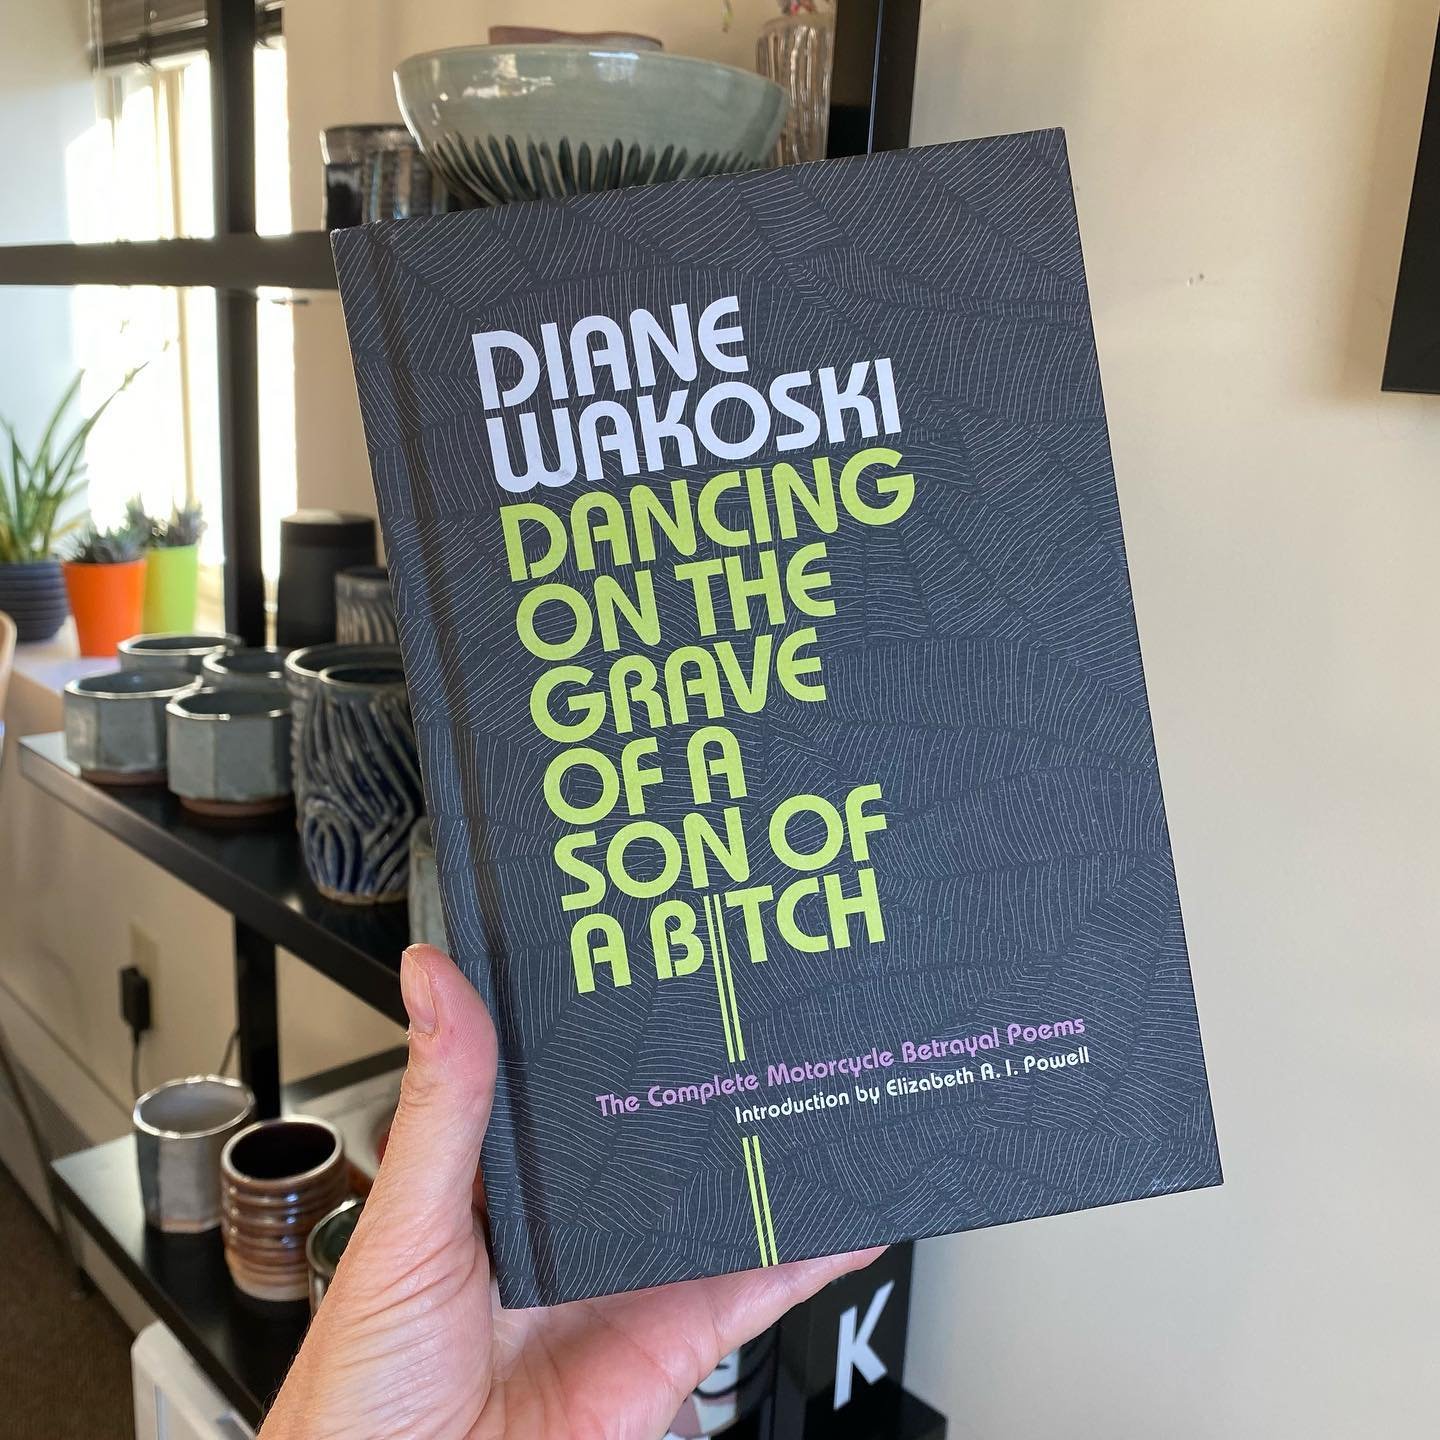 Always exciting when the real thing shows up and you can hold it in your hand. I did the cover and interior of Diane Wakoski&rsquo;s book of collected poems, published by Black Sparrow Press. Available for your book. 😌
&bull;
&bull;
#bookdesigner #b